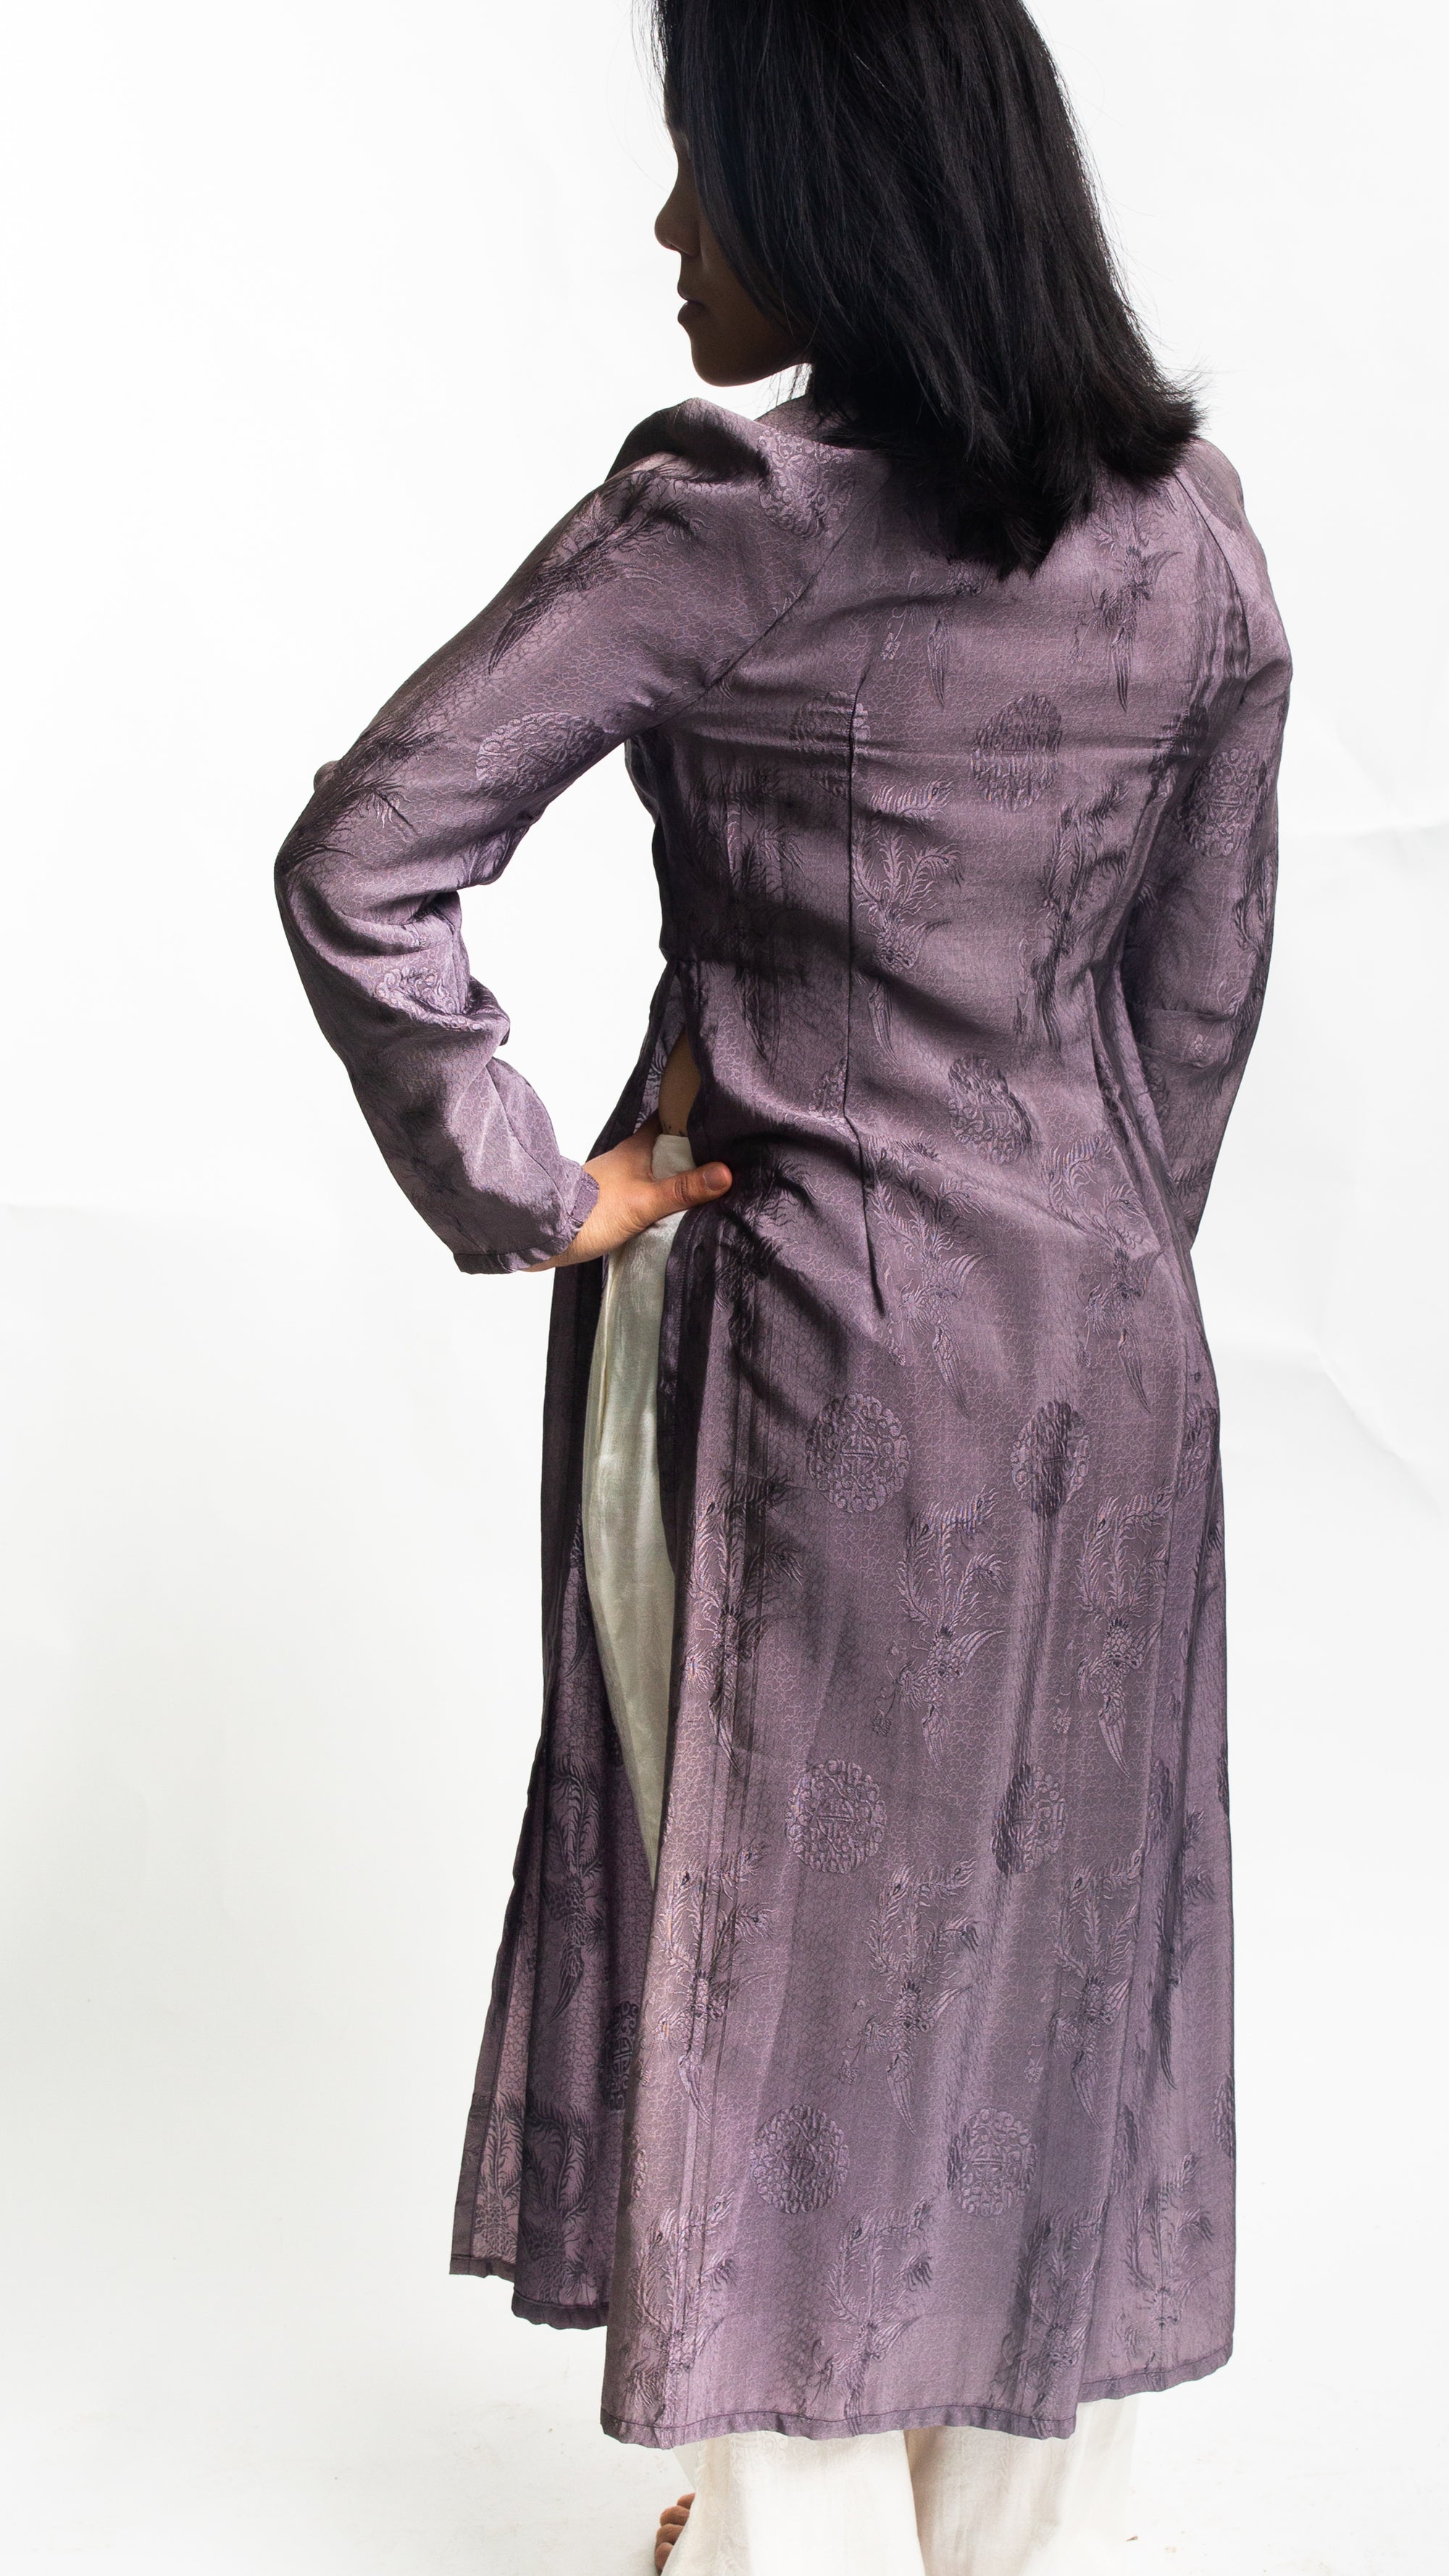 Back View of Vietnamese American woman wearing a purple silk Ao Dai tunic with white pants in front of white backdrop.